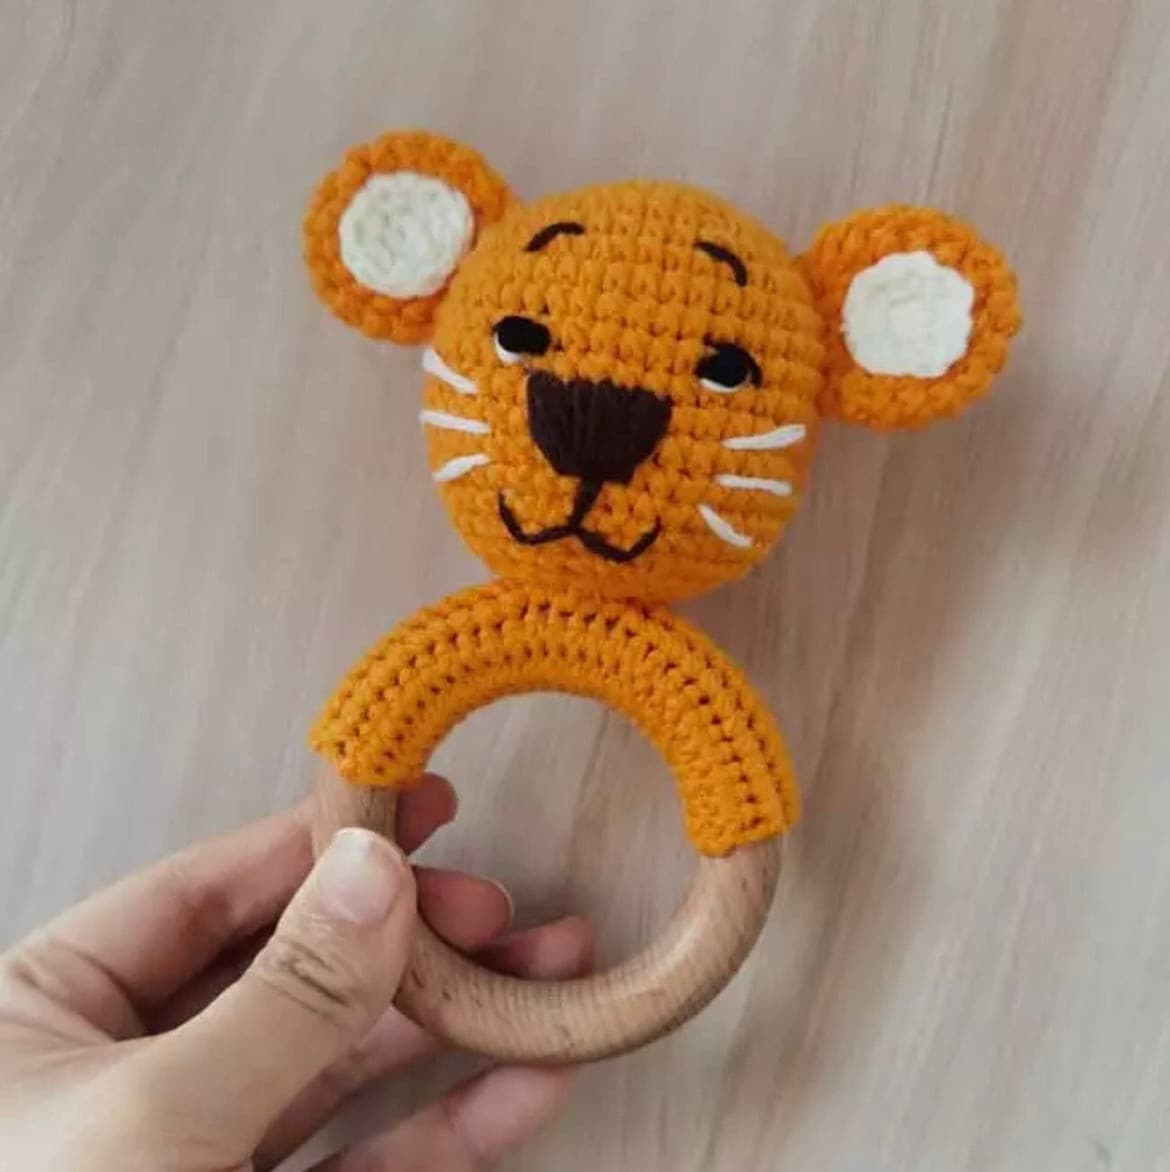 Crochet Baby Rattle Toy, Smooth Beech Wood Teething, Crochet Ring Soother Baby Girls Toys Children Product Gif.